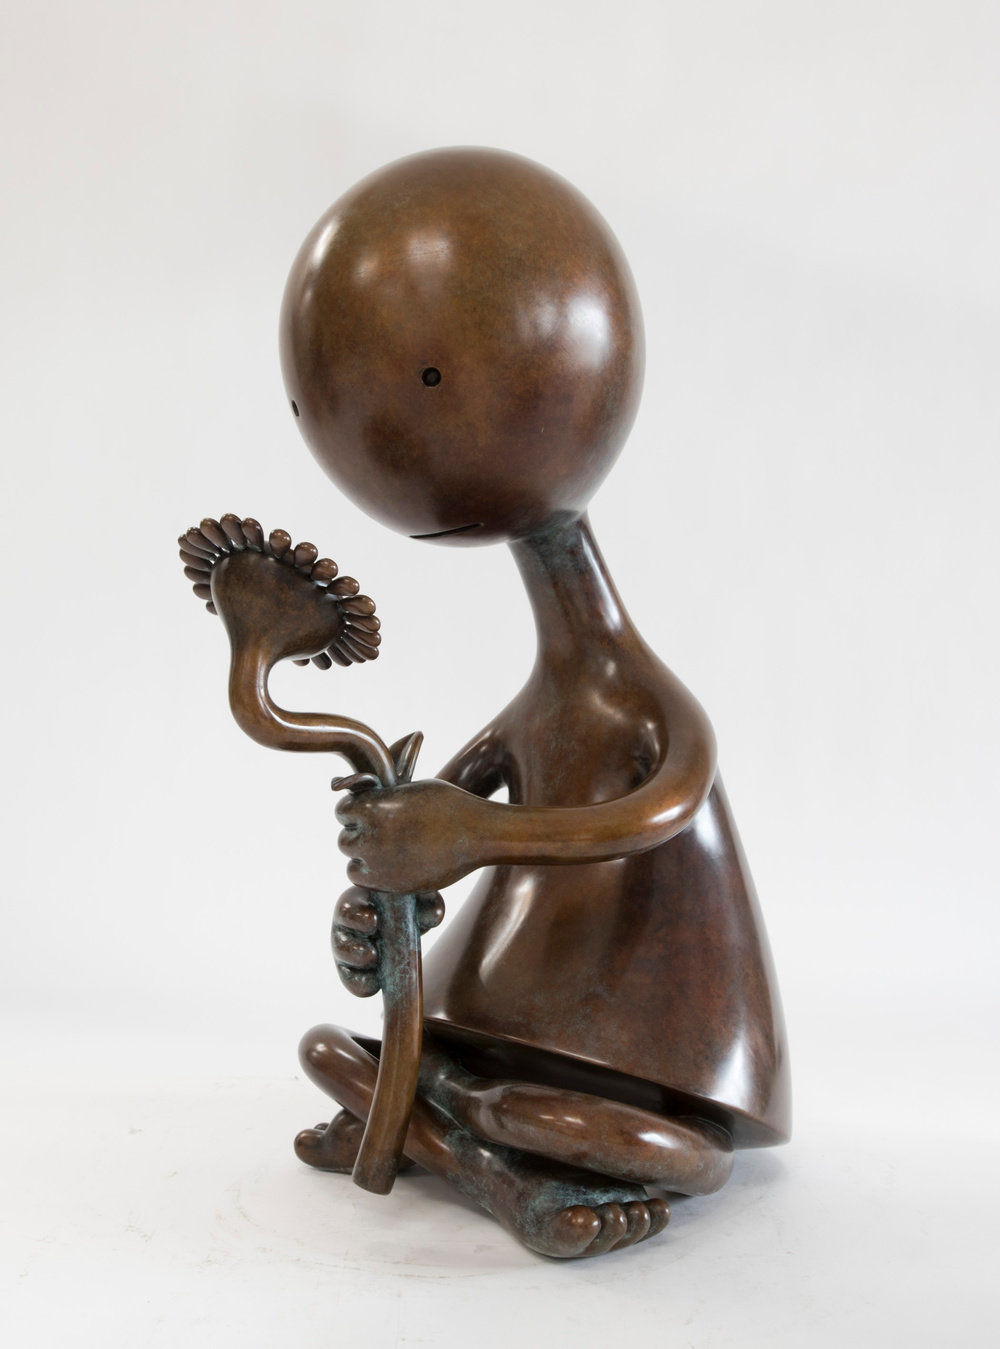 Otterness, girl with flower, 2017, bronze, ed. of 3, 32 3 4 x 15 x 22 in., non 59.374